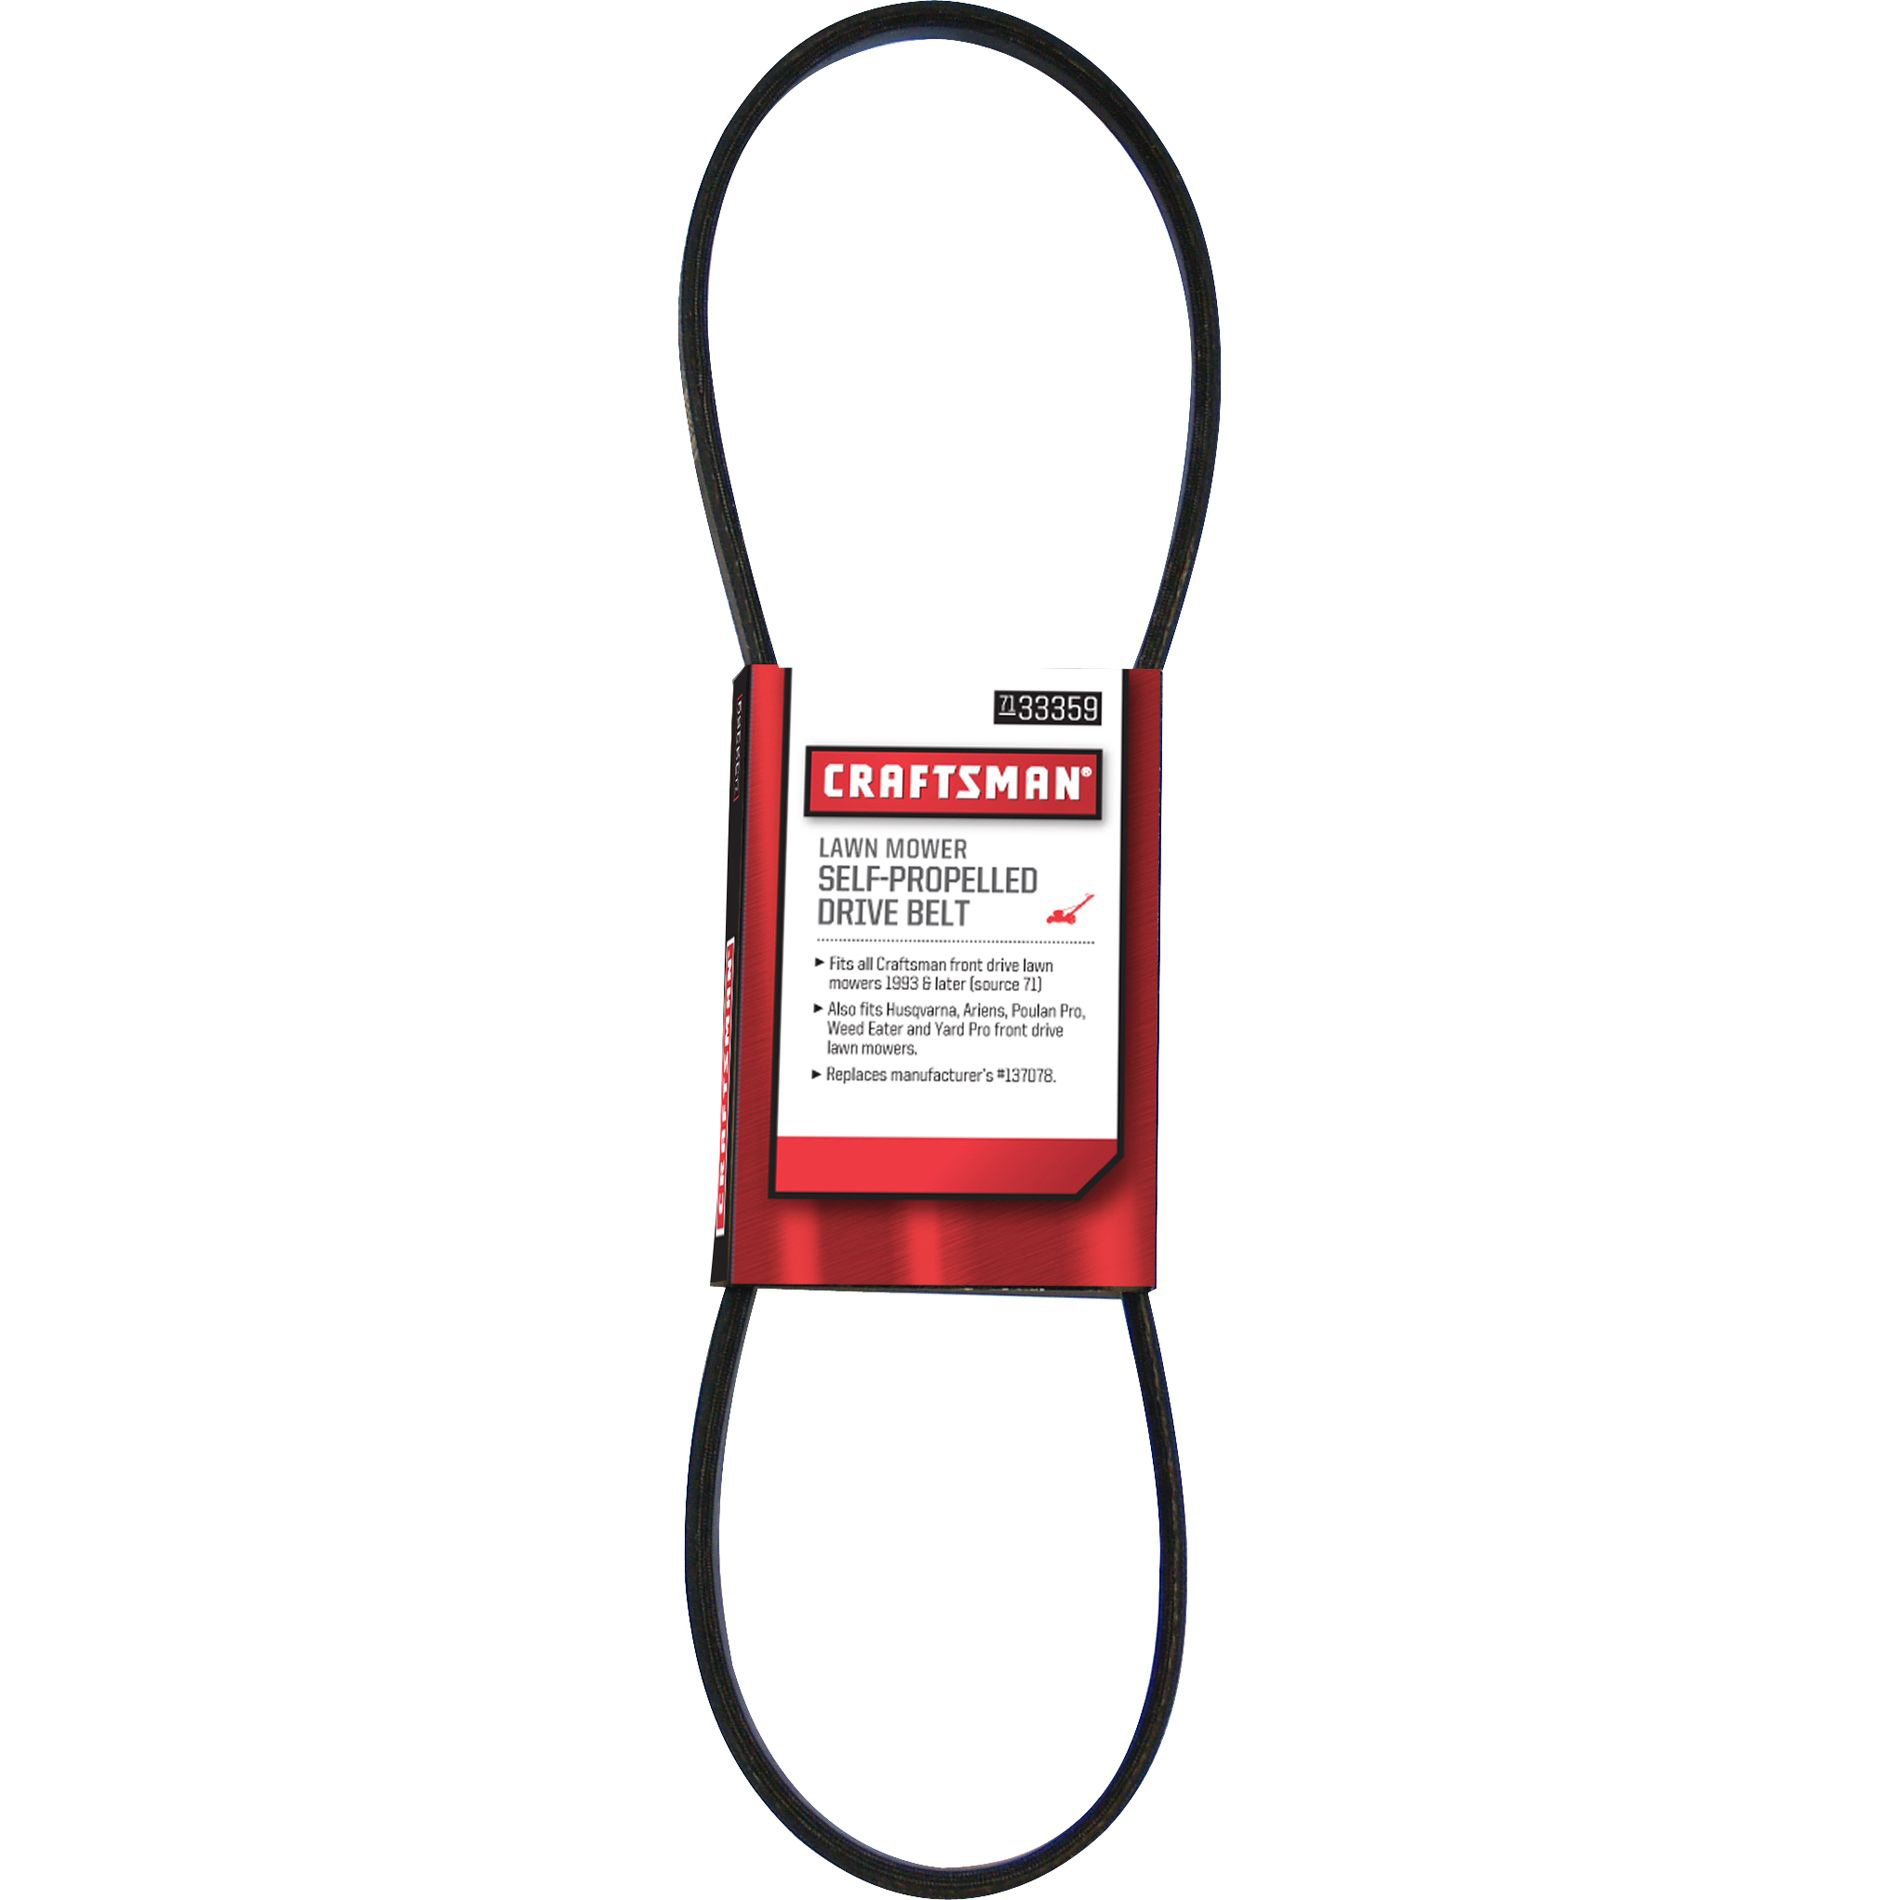 Craftsman 22in. Lawn Mower Drive Belt for 1993 and Later - Lawn